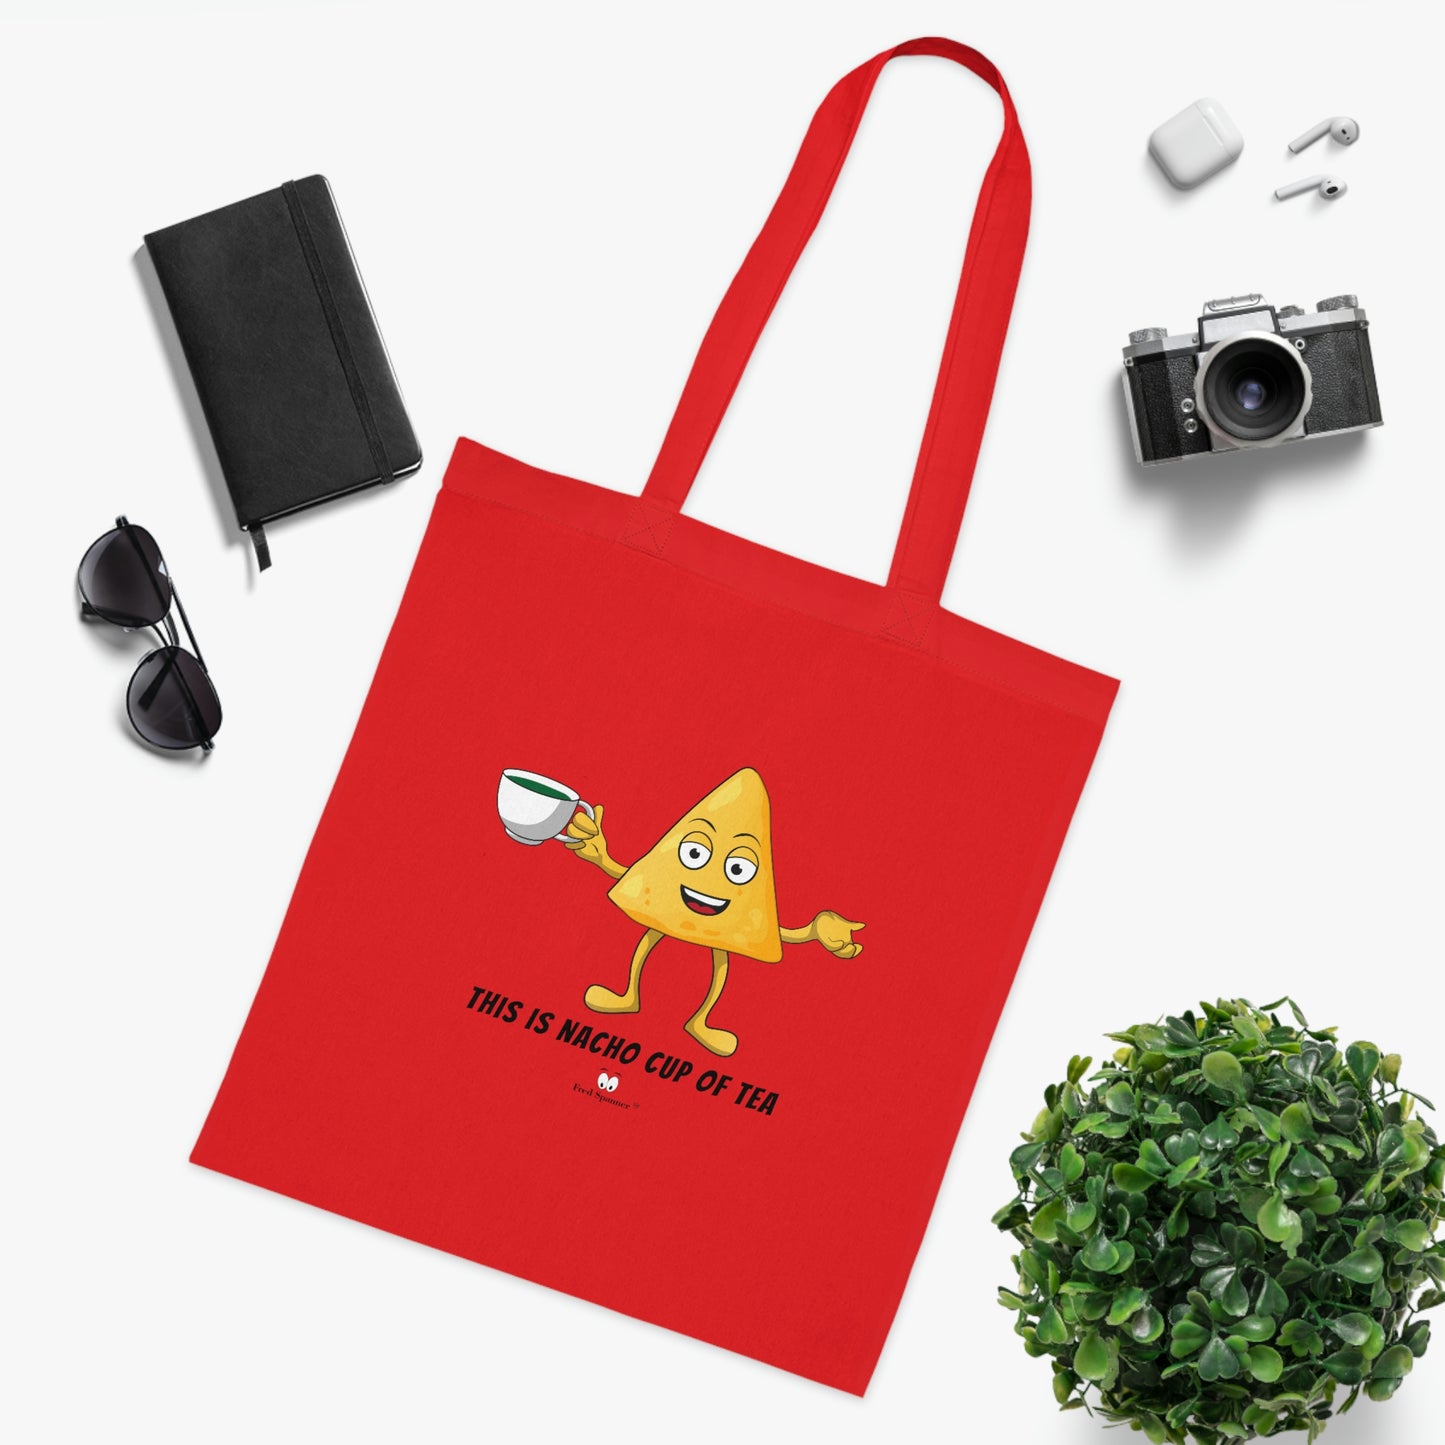 This is nacho cup of tea. Cotton Tote Bag